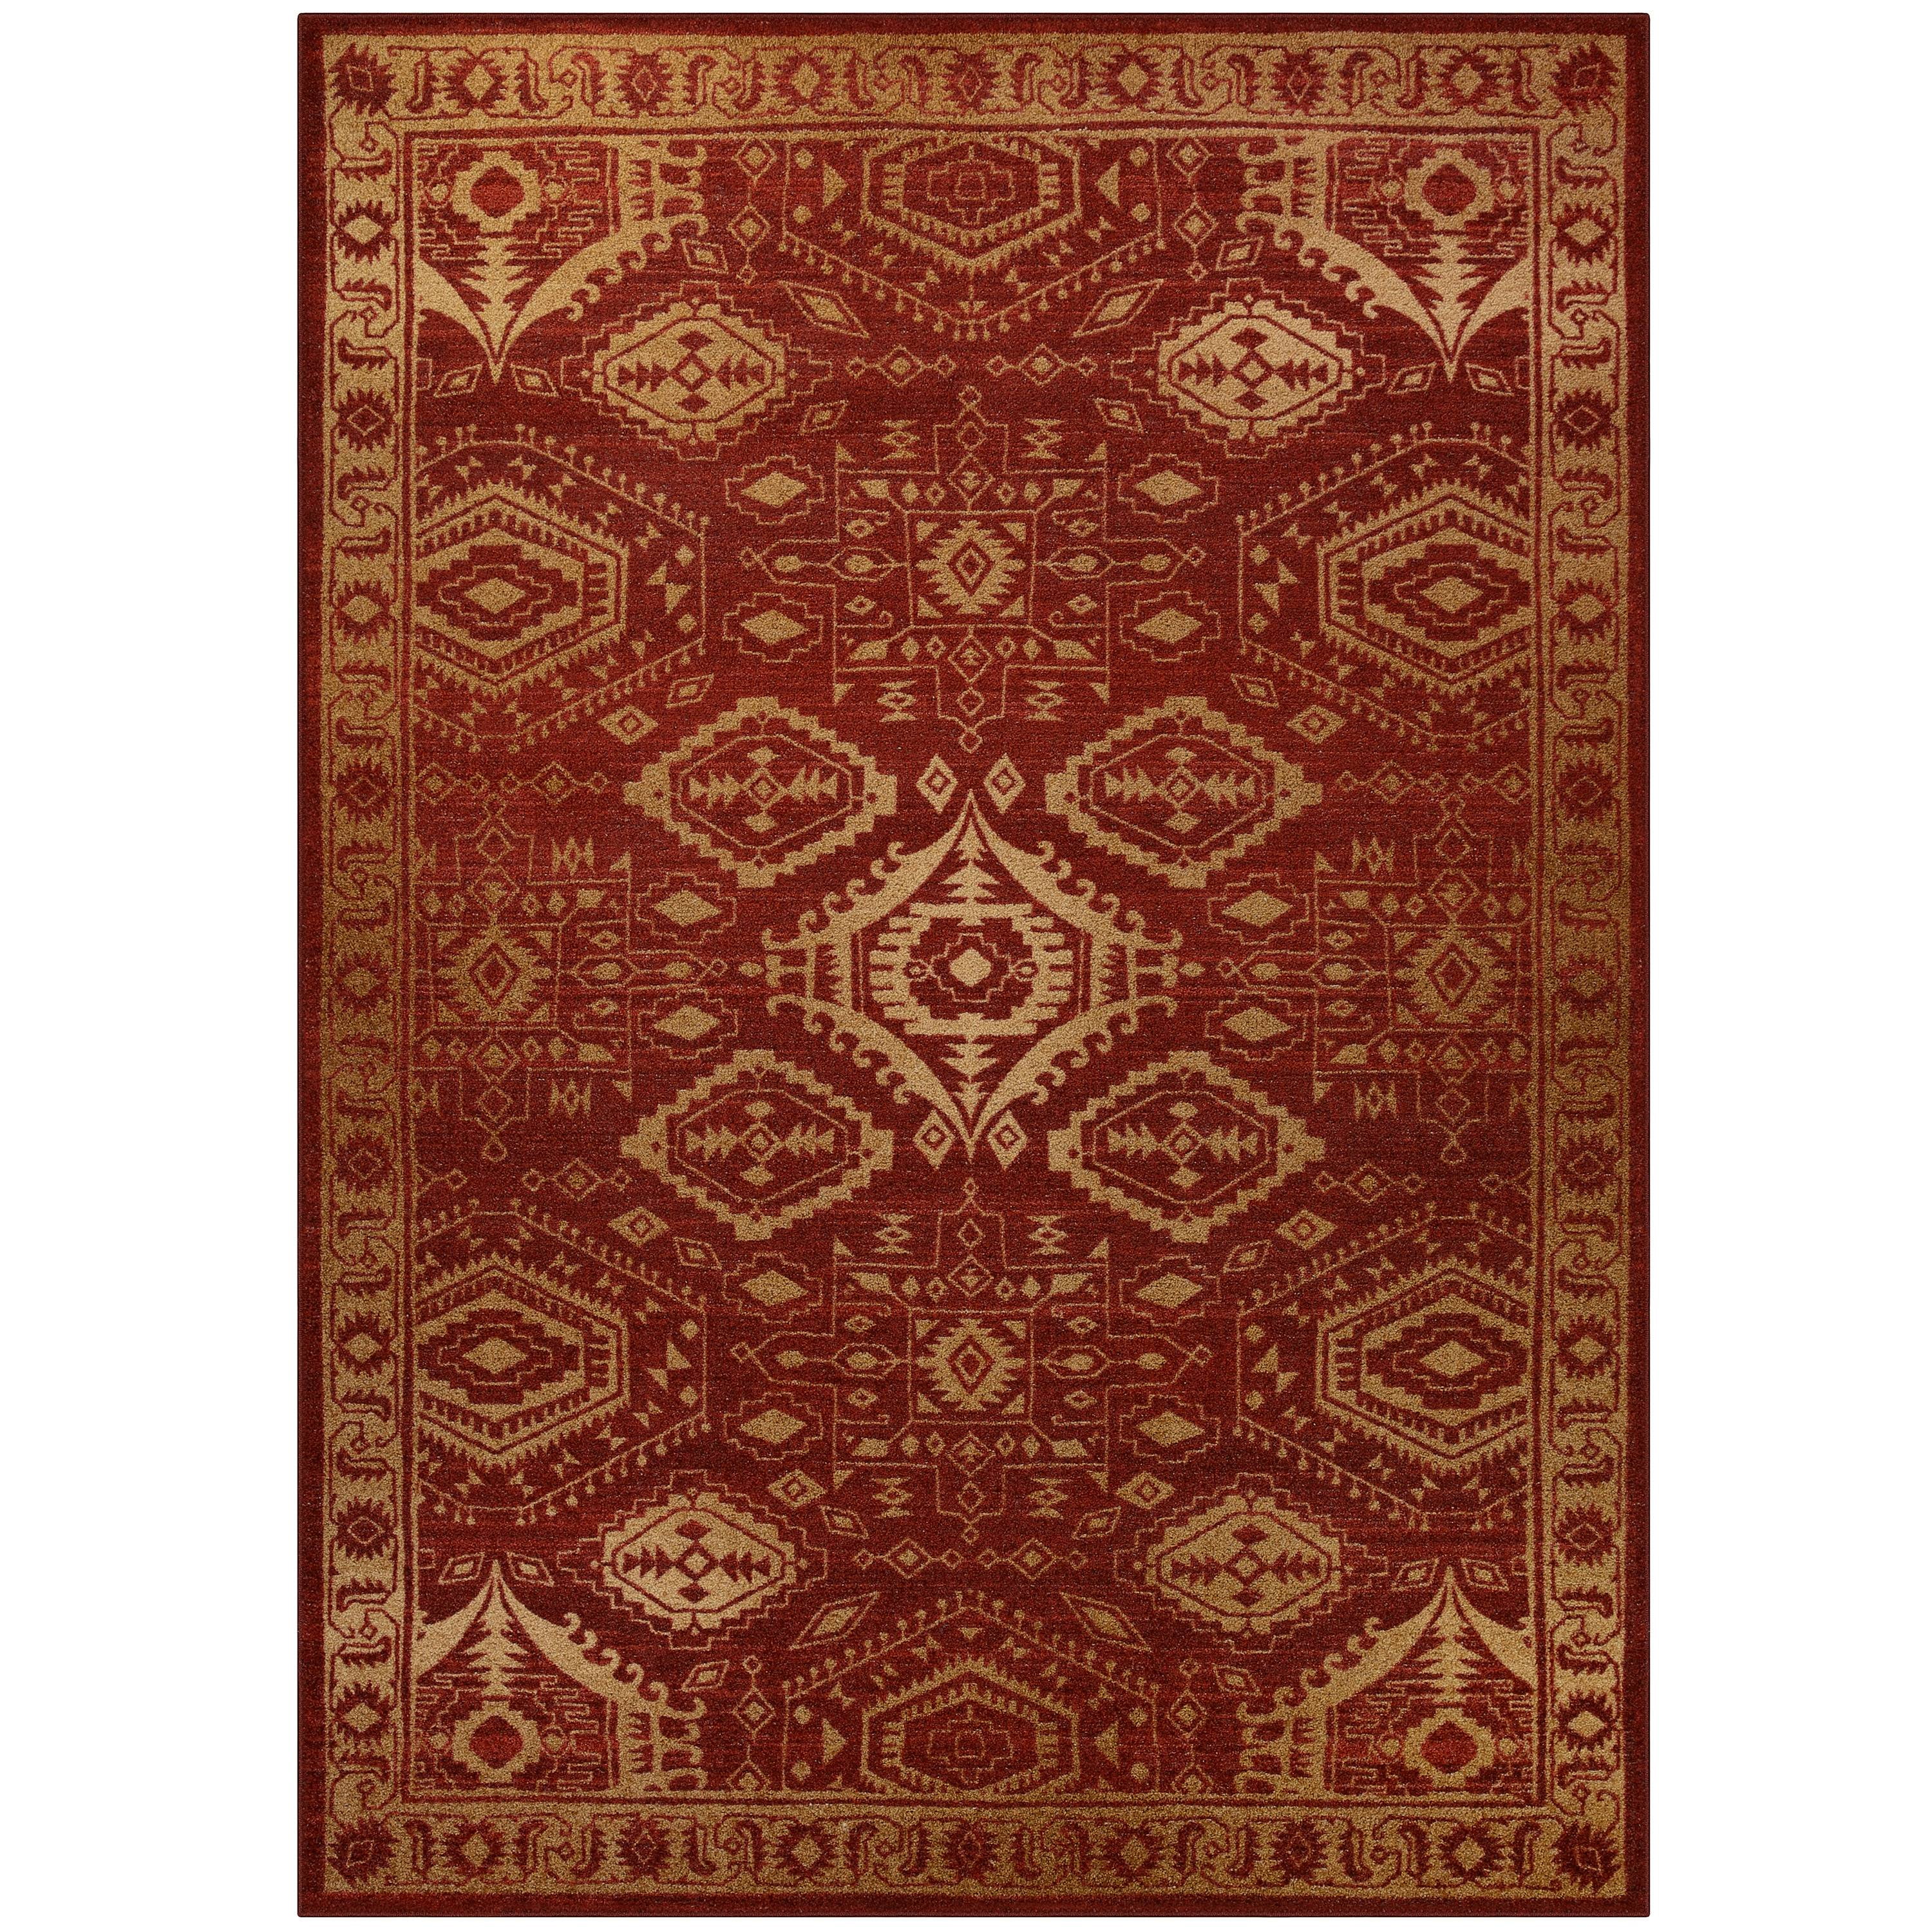 Red/Gold Maples Rugs Georgina Traditional Runner Rug Non Slip Hallway Entry Carpet Made in USA 1'8 x 5 